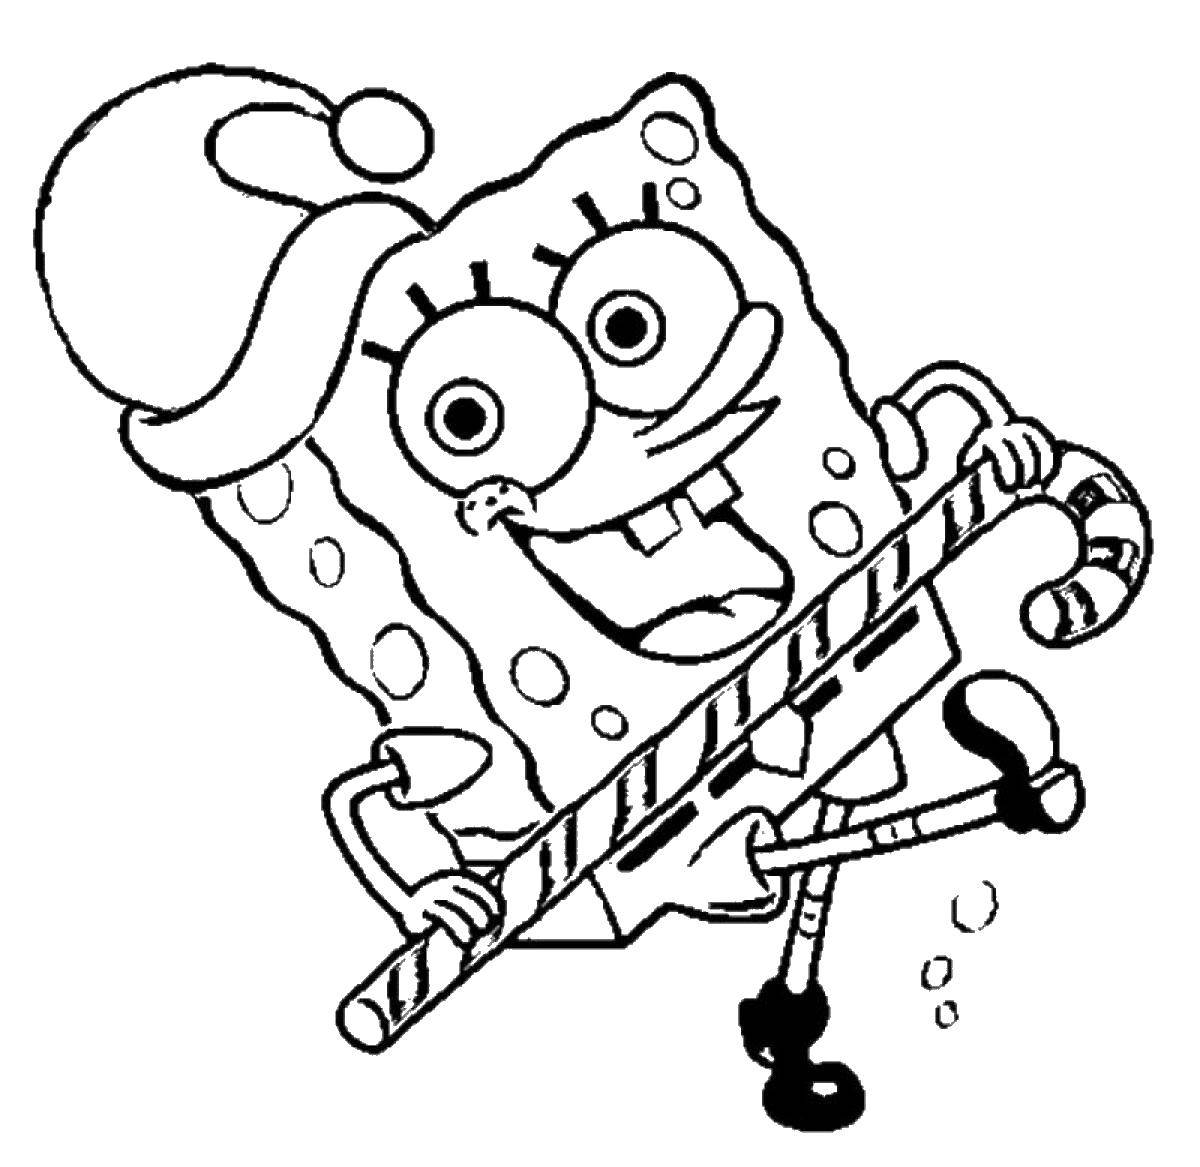 coloring-pages-spongebob-christmas